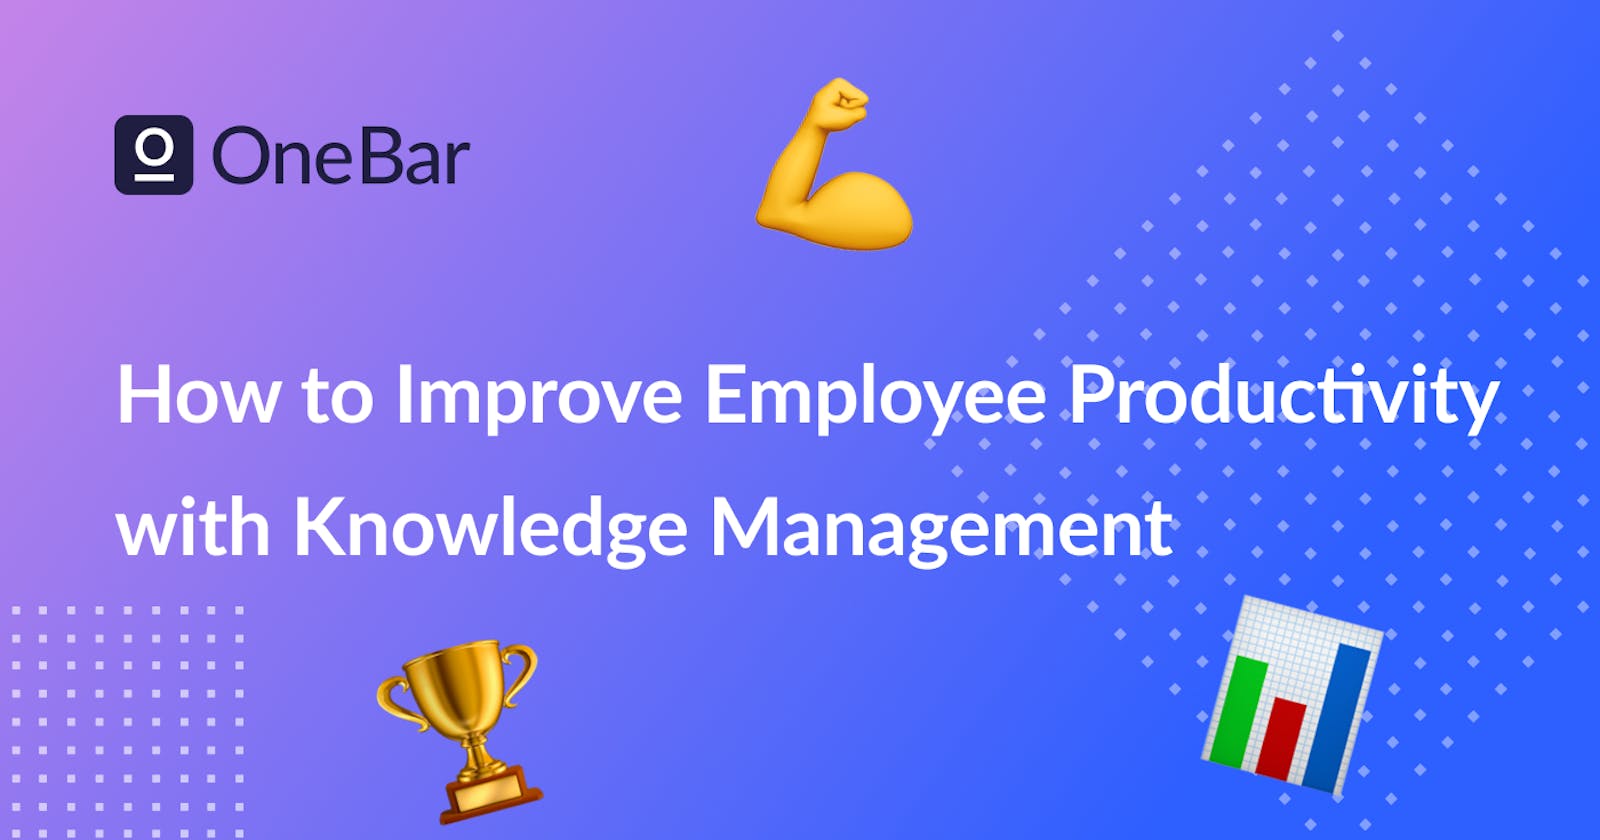 Improving Employee Productivity with Knowledge